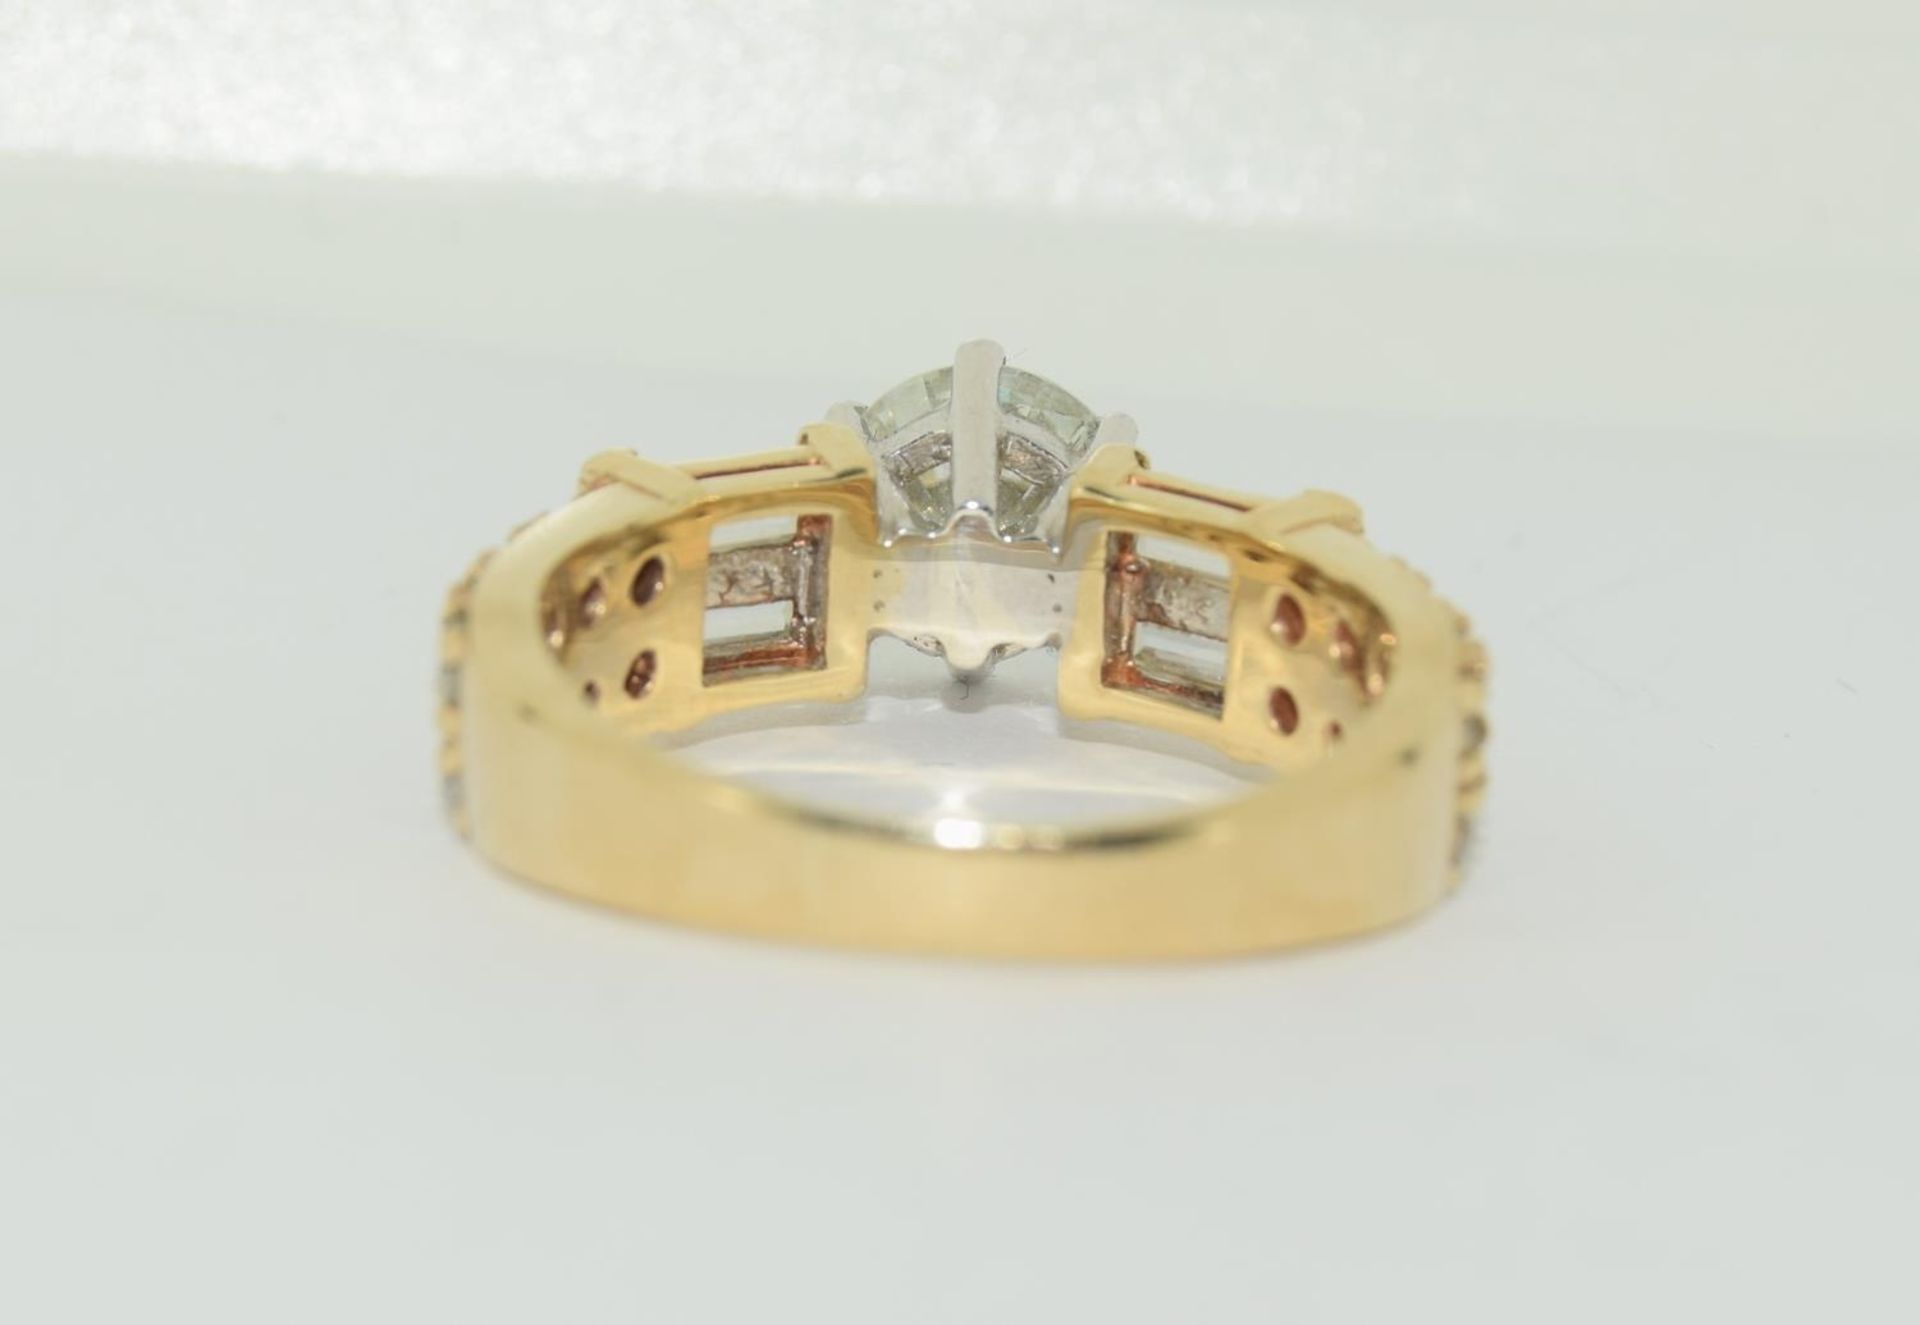 9ct gold Moissanite Diamond ring - 1.00ct centre stone, baguette/round stones on sides. Size M+. - Image 3 of 5